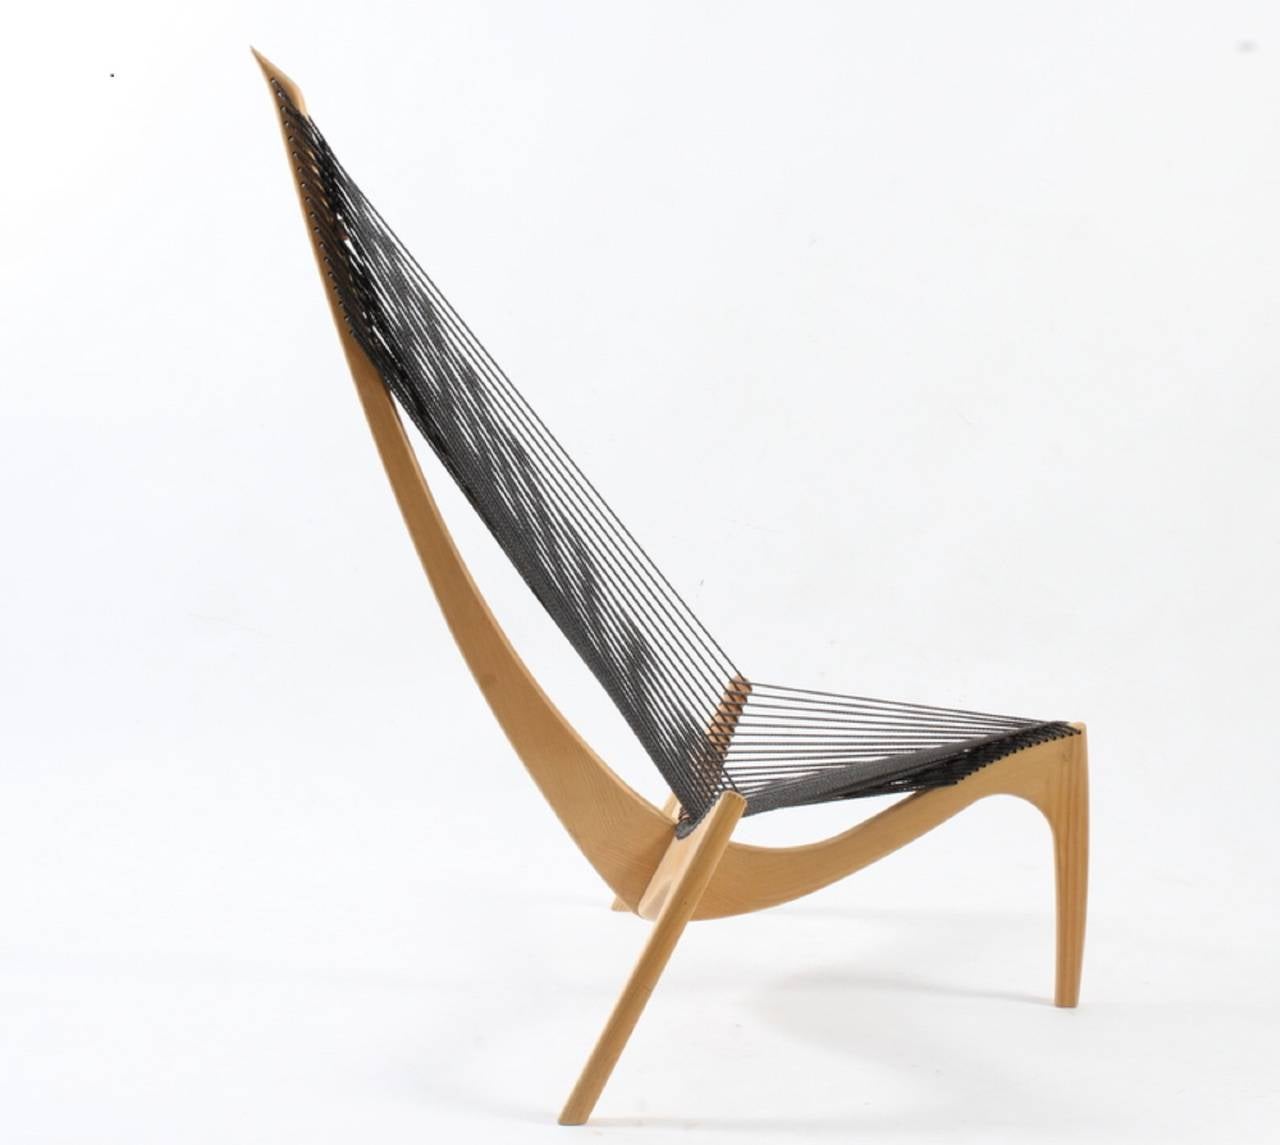 The harp chair by Jorgen Hovelskov in solid ashe with the original flag halyard rope. Much more comfortable than it looks! Manufactured by Jorgen Christensen Snedkerri.